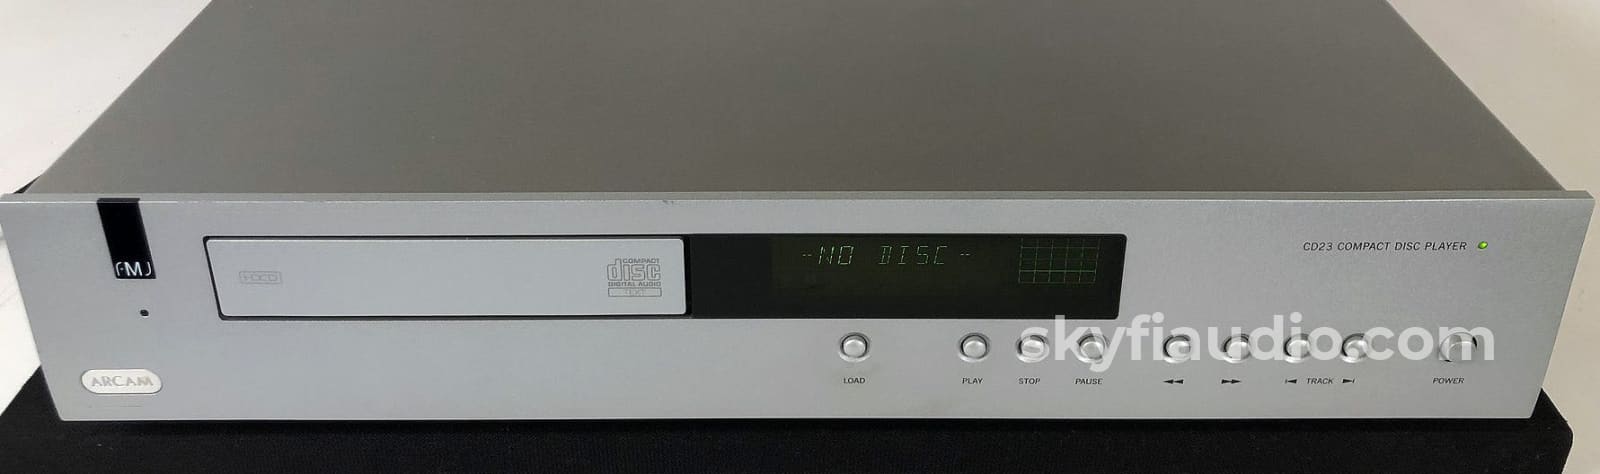 Arcam Fmj Cd23 Cd And Hdcd Player - Tested Working Perfectly + Digital